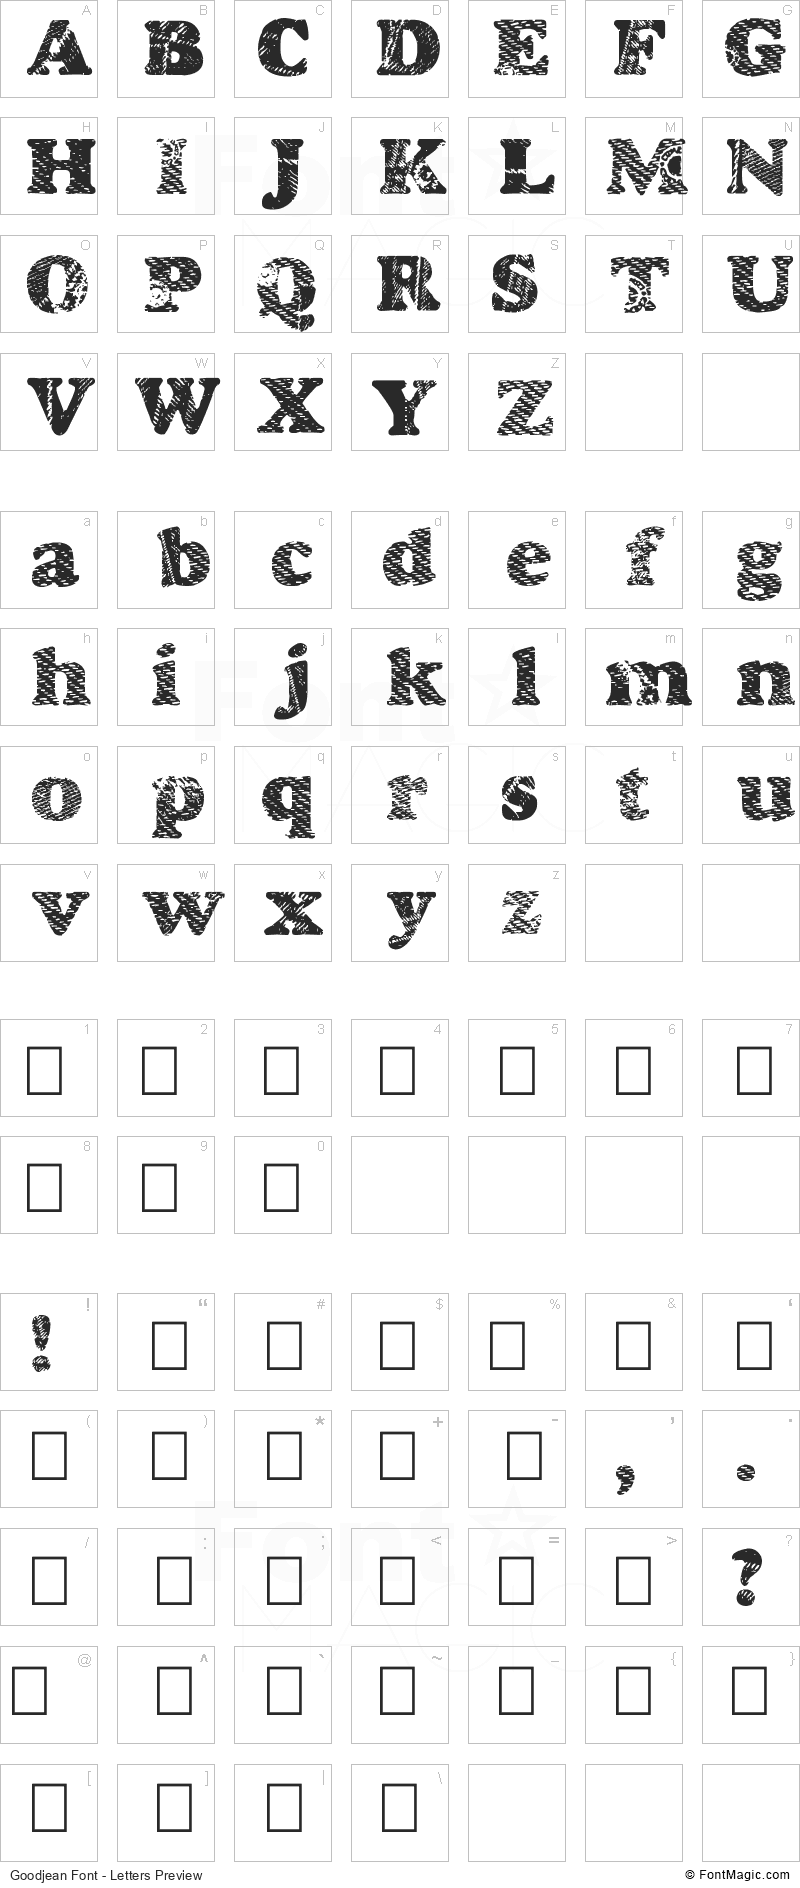 Goodjean Font - All Latters Preview Chart